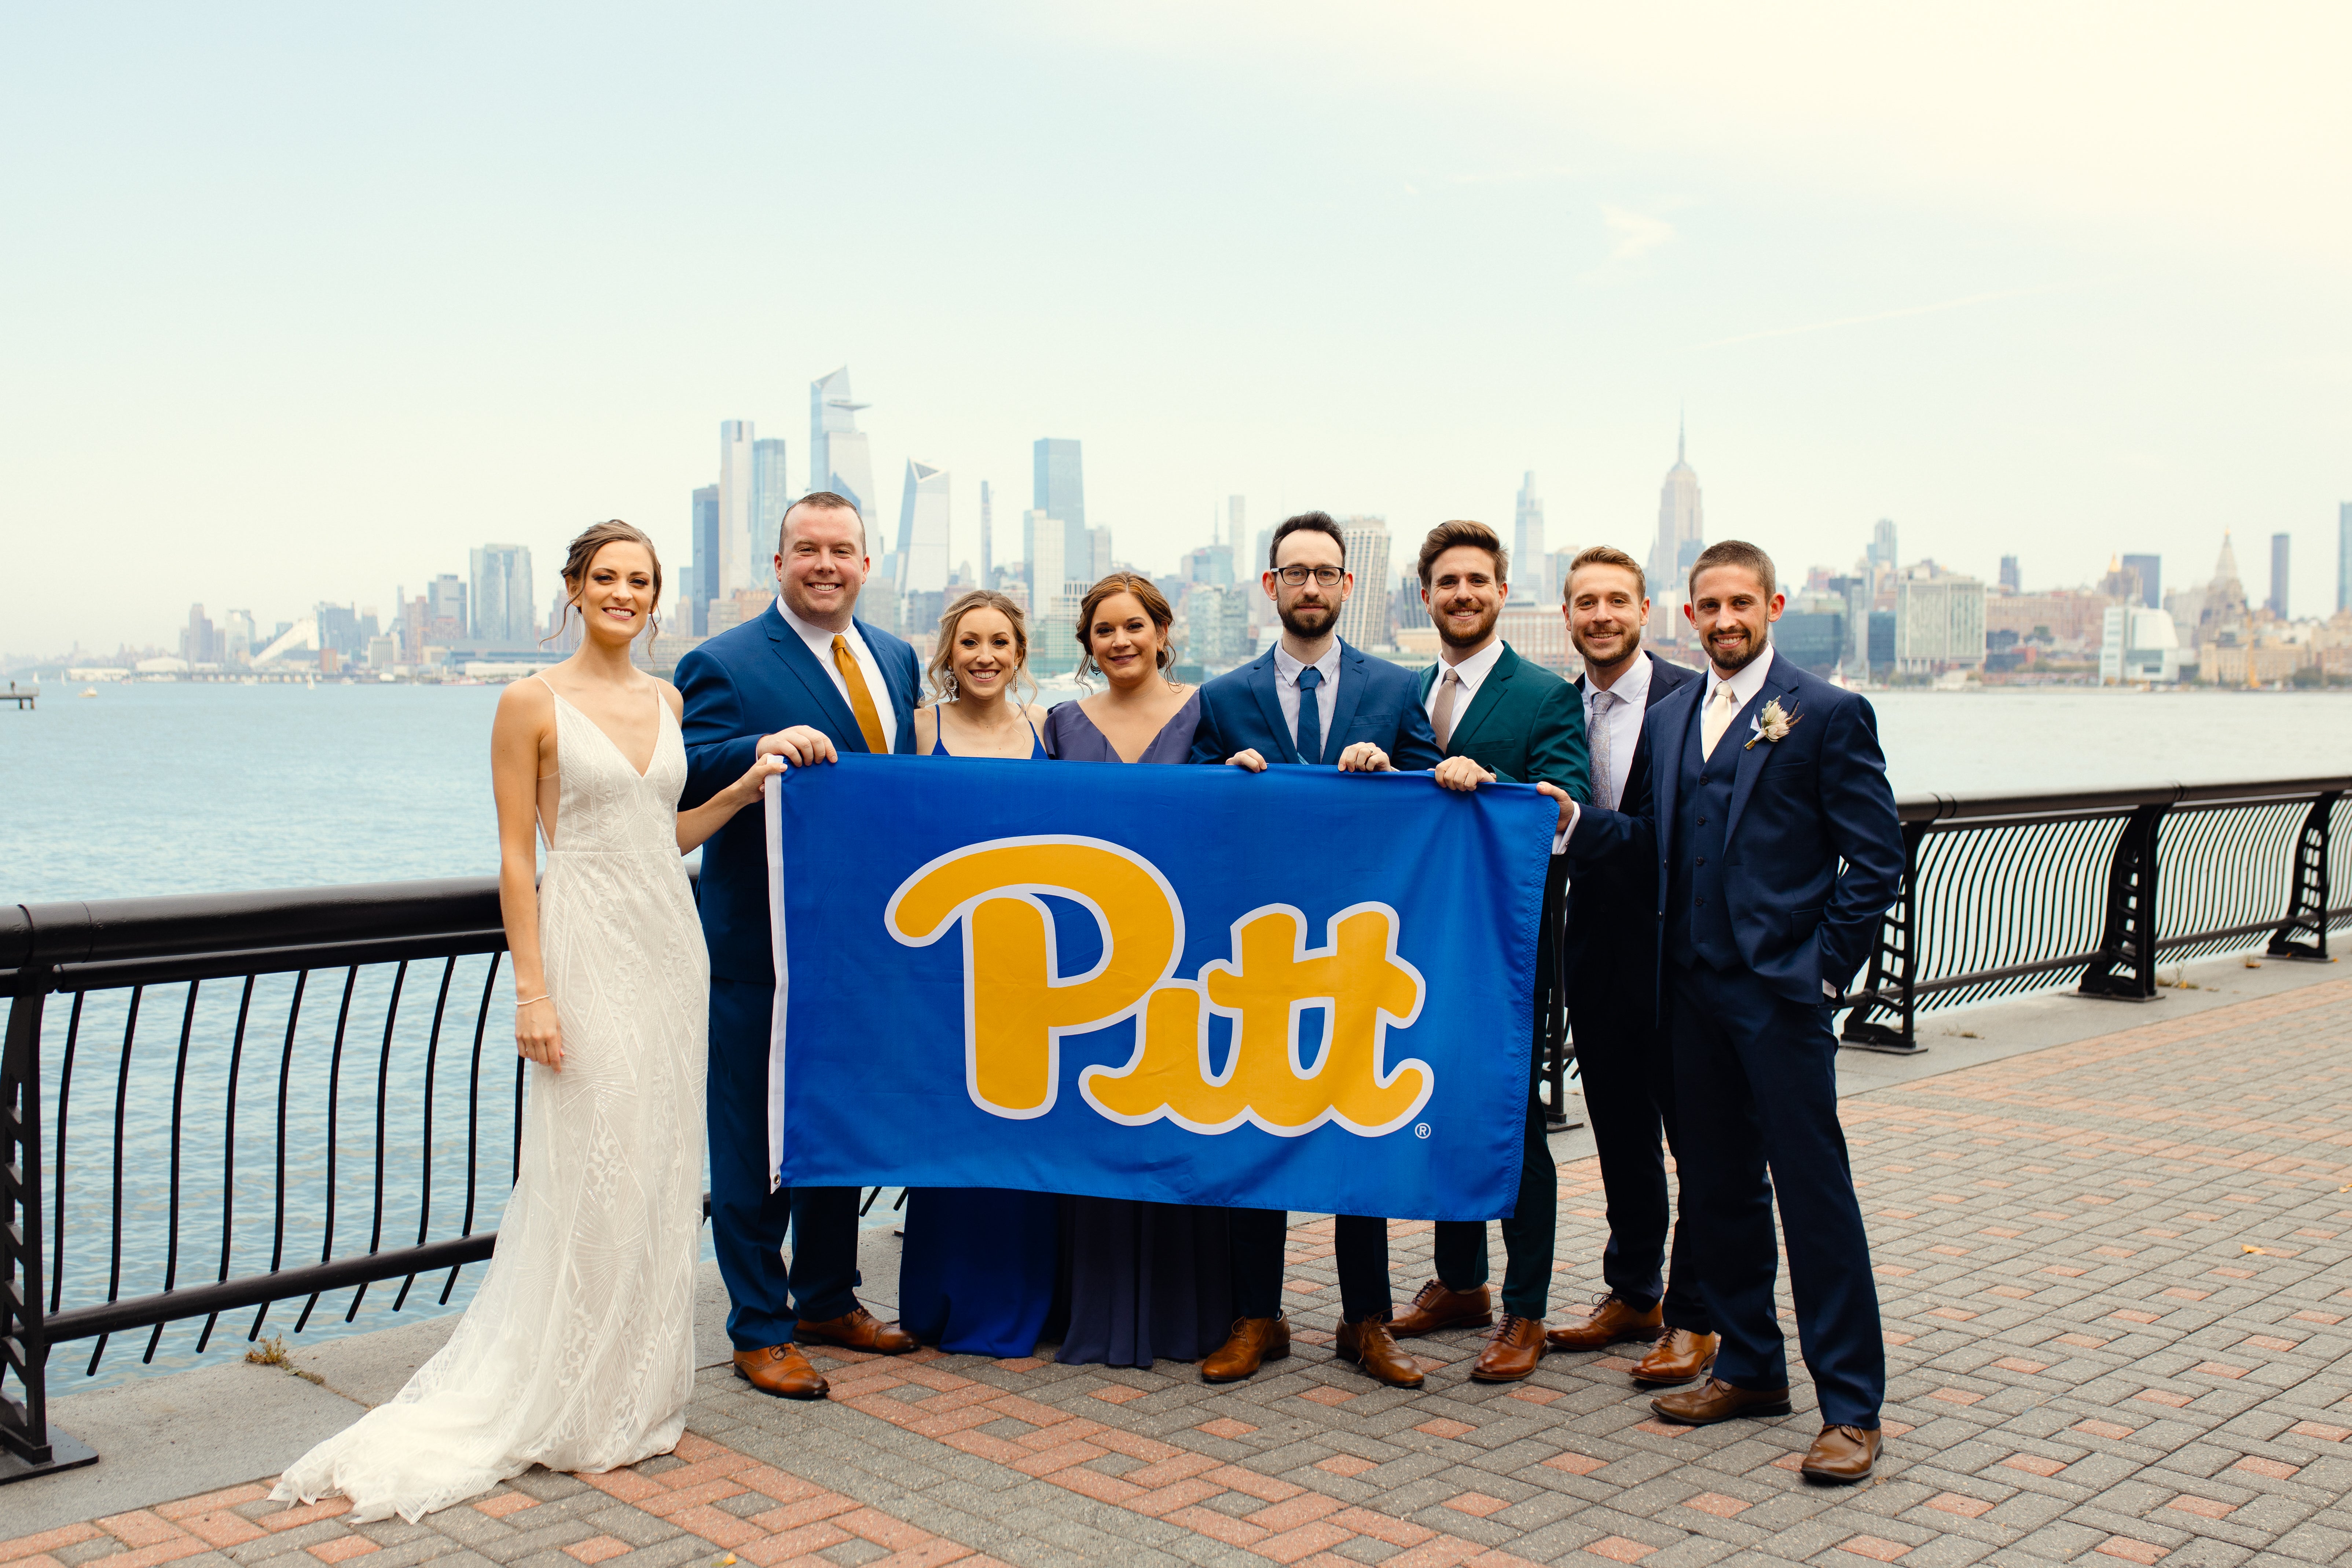 bride in white dress, groom and groomsmen in blue suits, and bridesmaids in blue dresses on Pitt script flag in front of New York City skyline across the Hudson